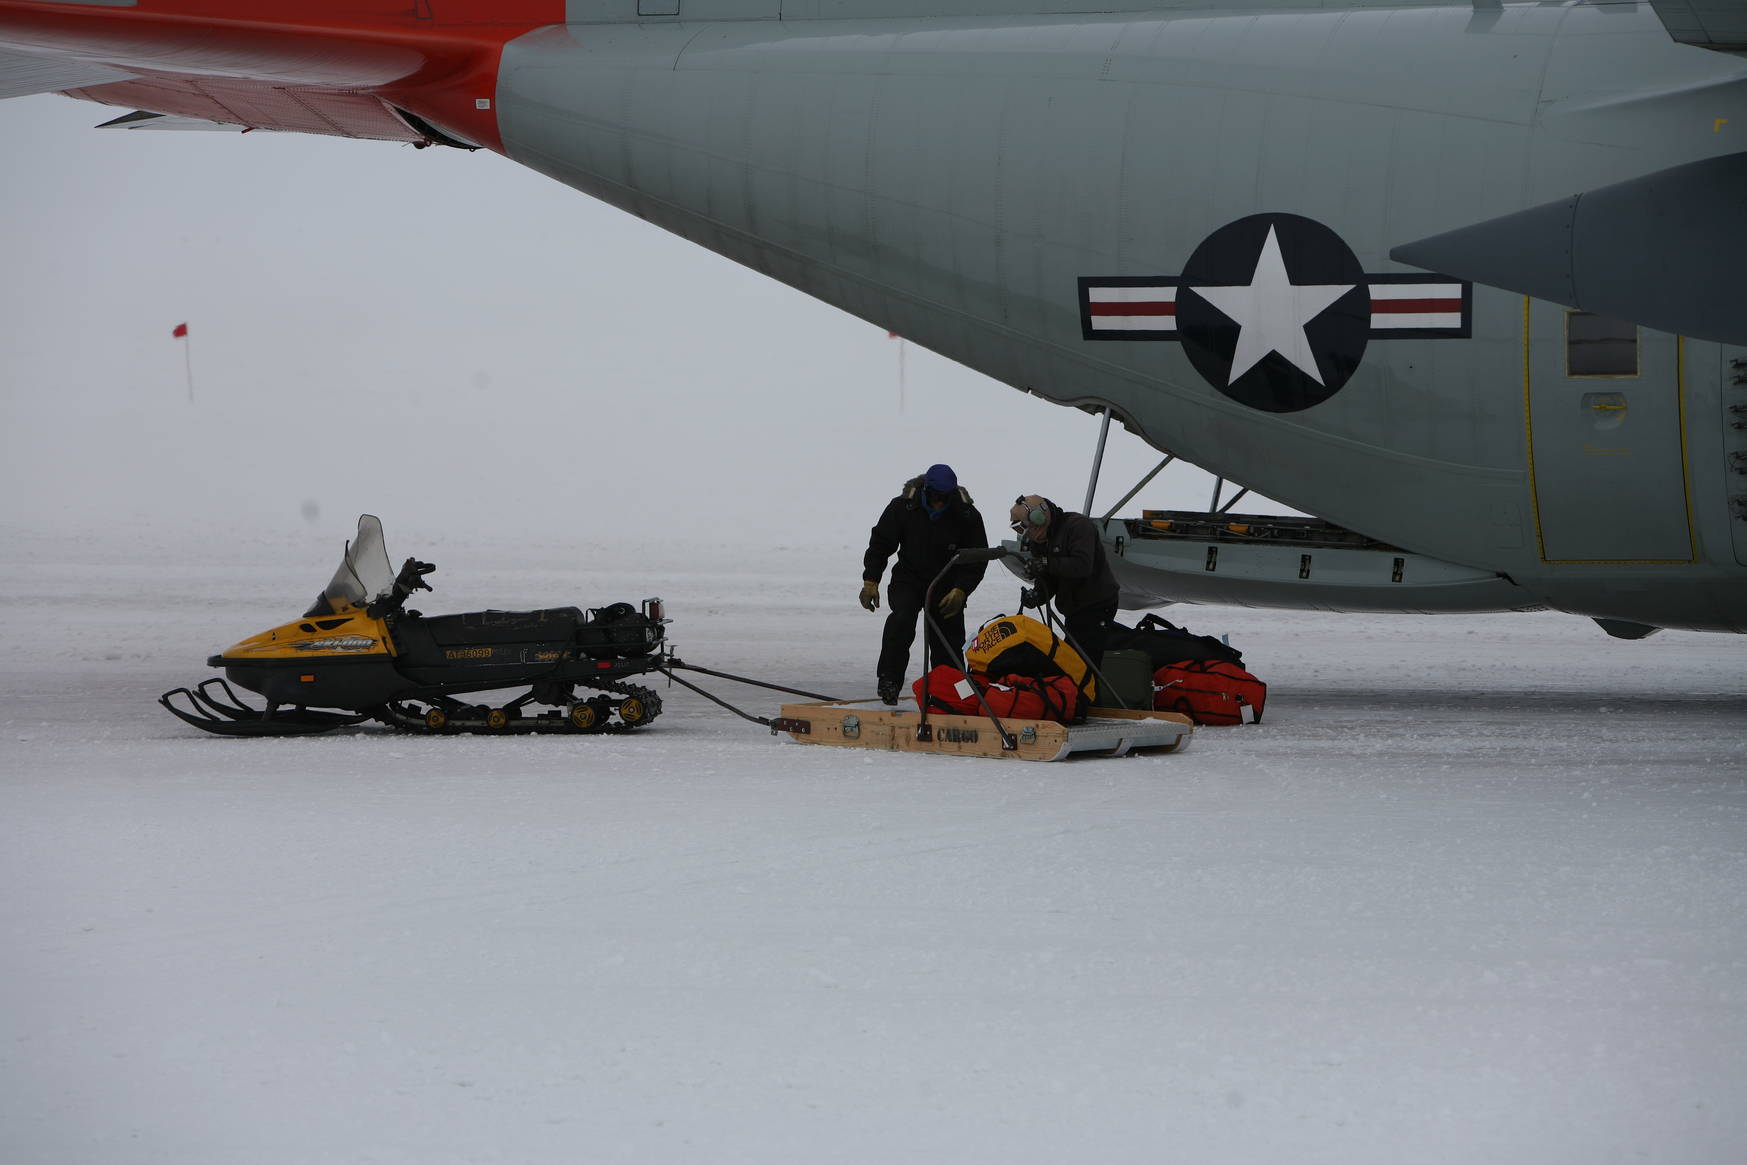 Passenger bags are brought to the aircraft by skimobile.